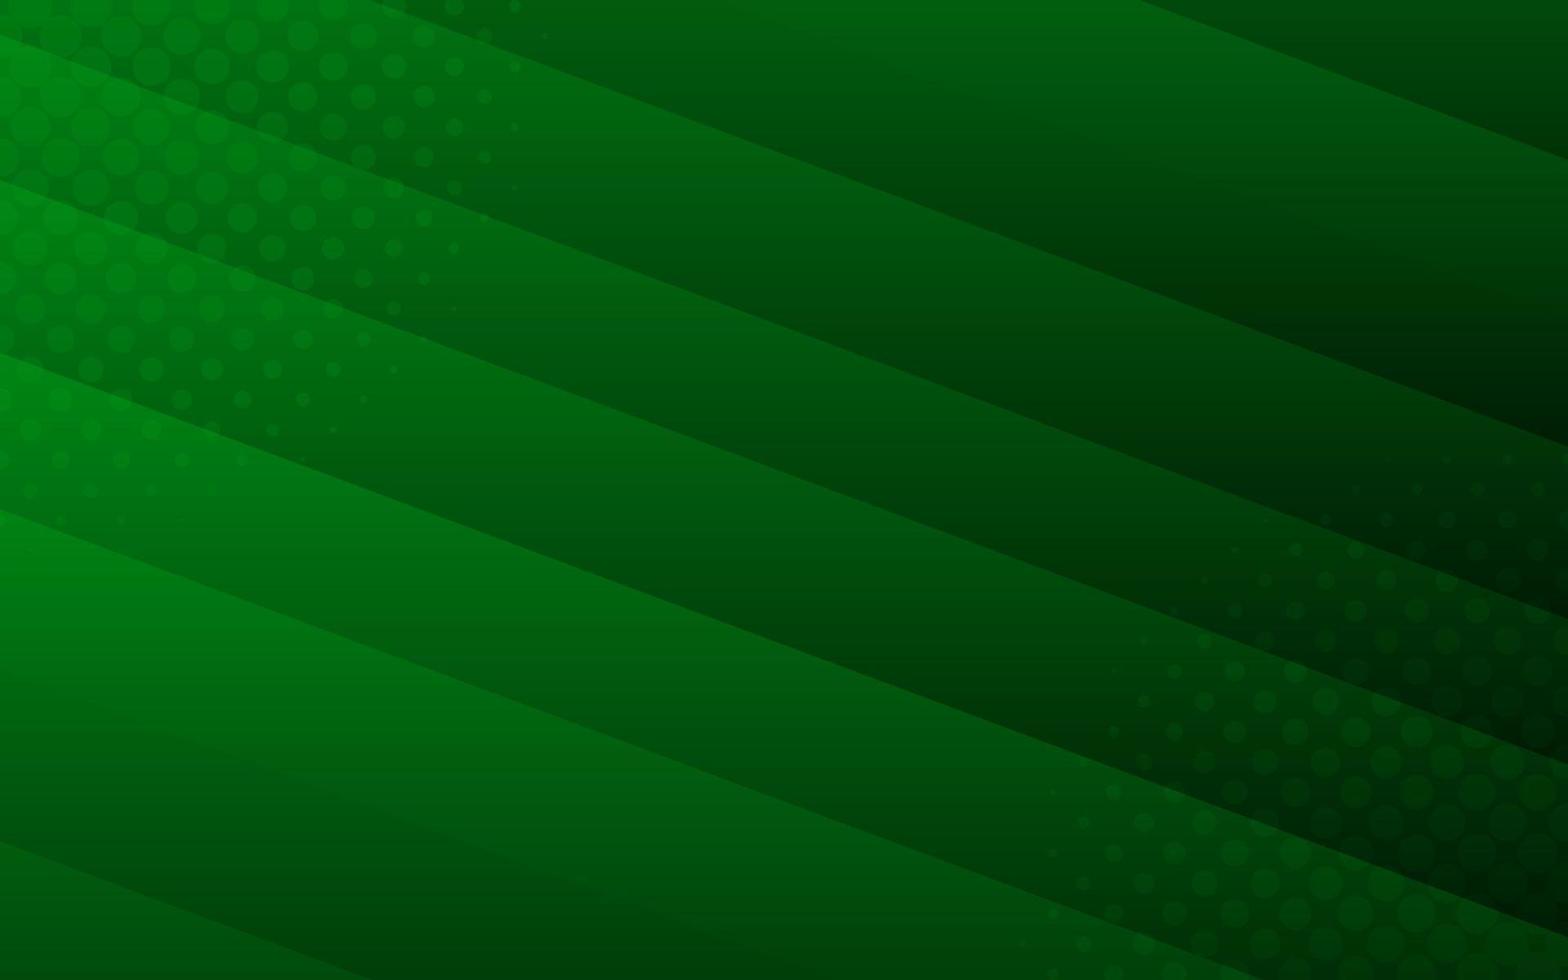 Green background free download vector